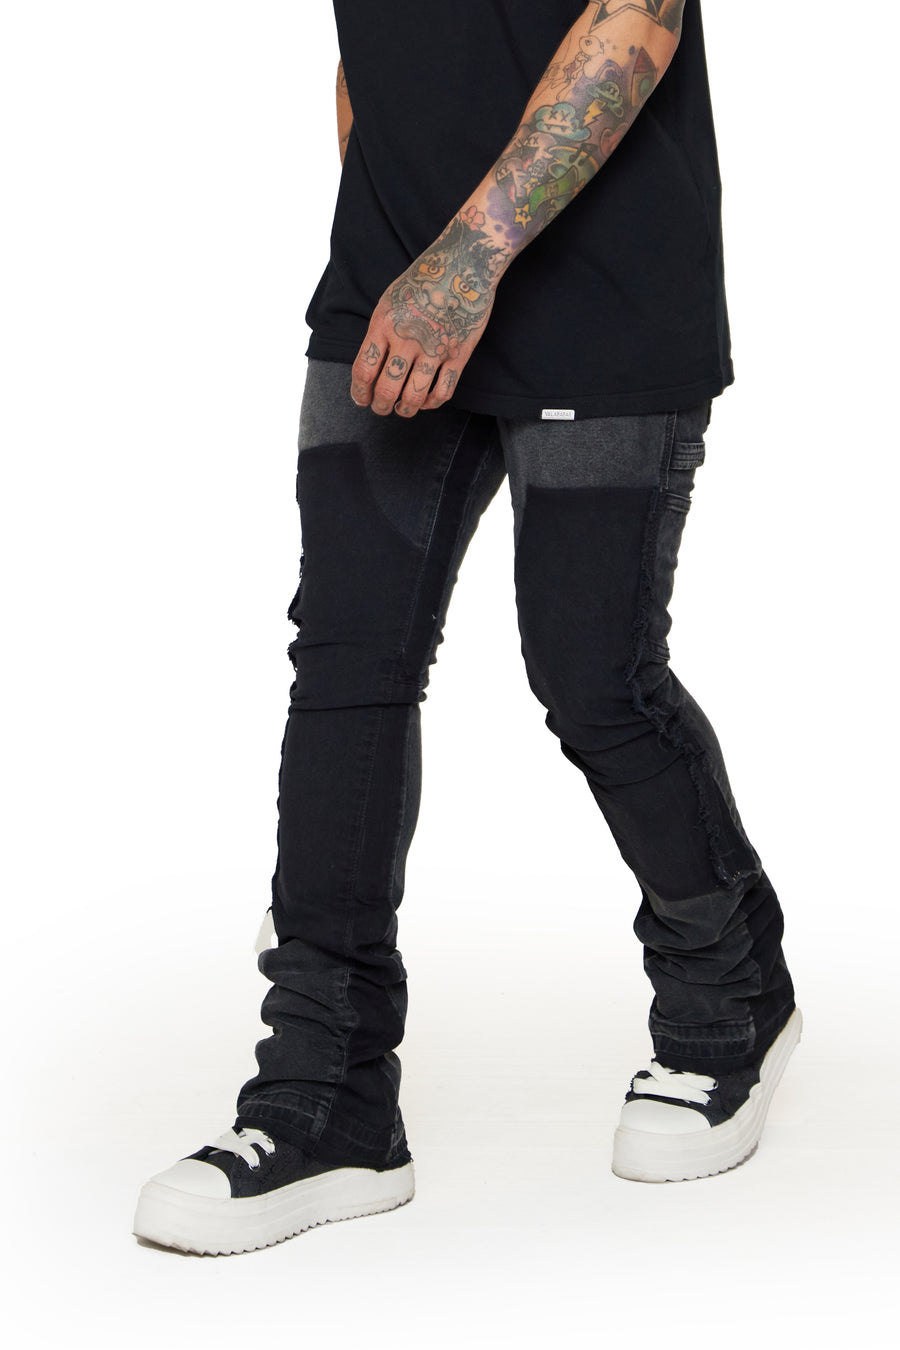 ‚ÄúALPHA" BLACK WASHED STACKED FLARE JEAN